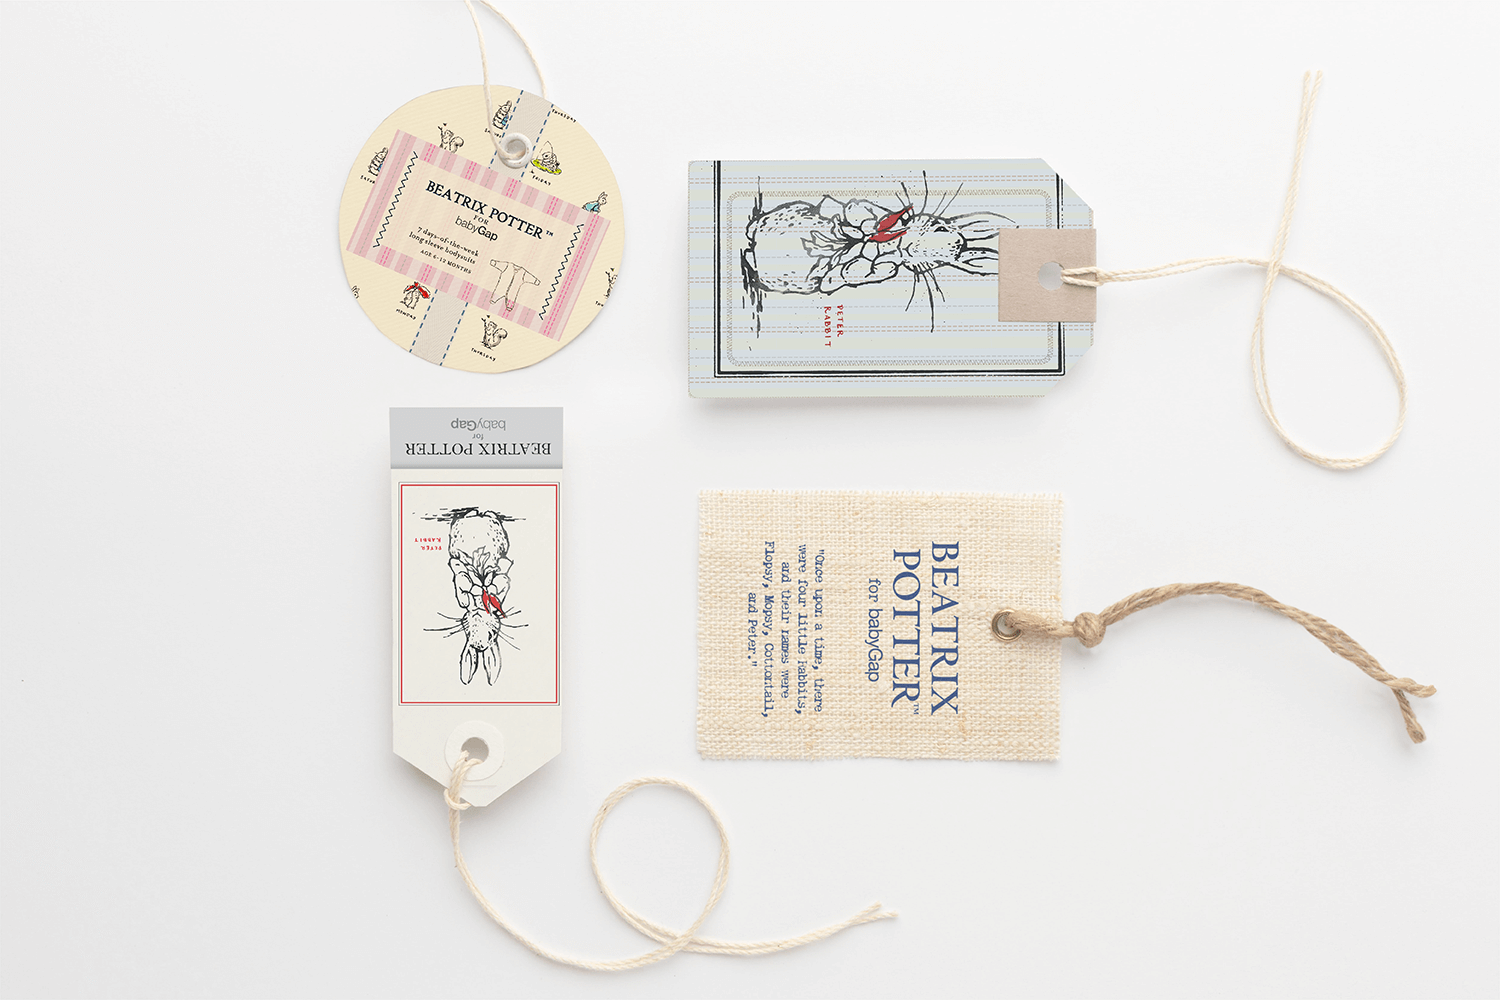 Hang tags for Baby Gap's product collaboration with Beatrix Potter, Peter the Rabitt.